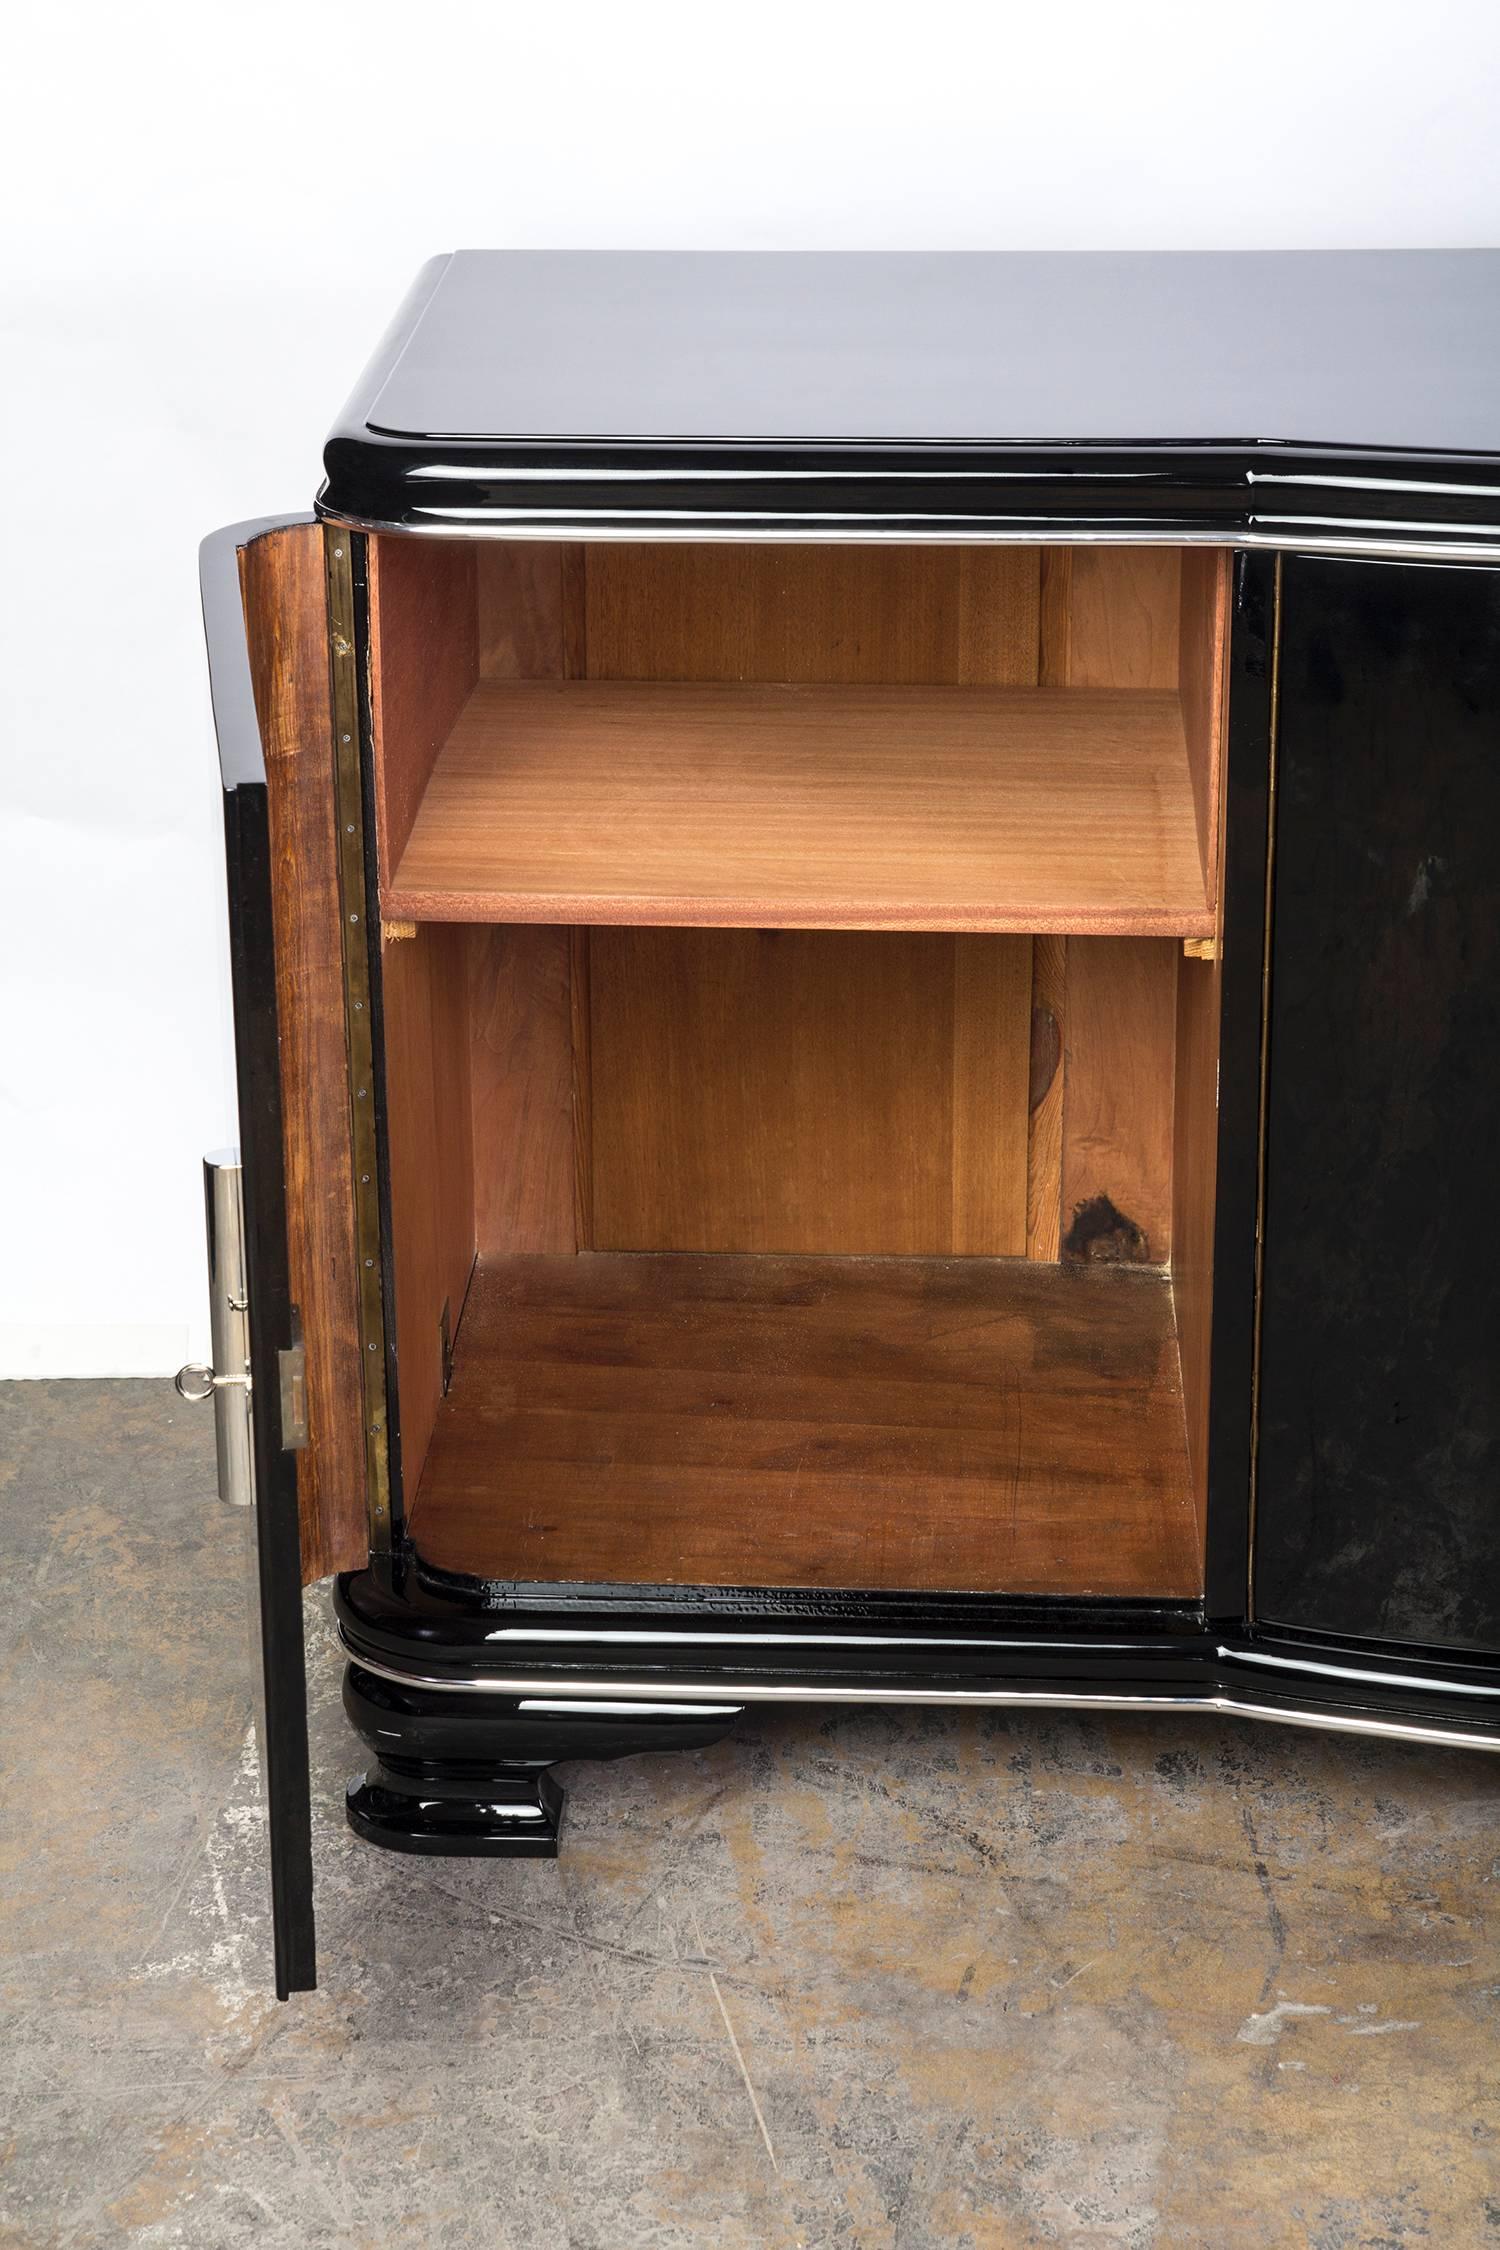 This elegant streamlined Art Deco sideboard features a beautiful curved center and two swing doors to reveal plenty of storage. The piece has been finish in black lacquer with chromed line detailing and hardware.
Measures:
69 1/2” W x 23” D, 27